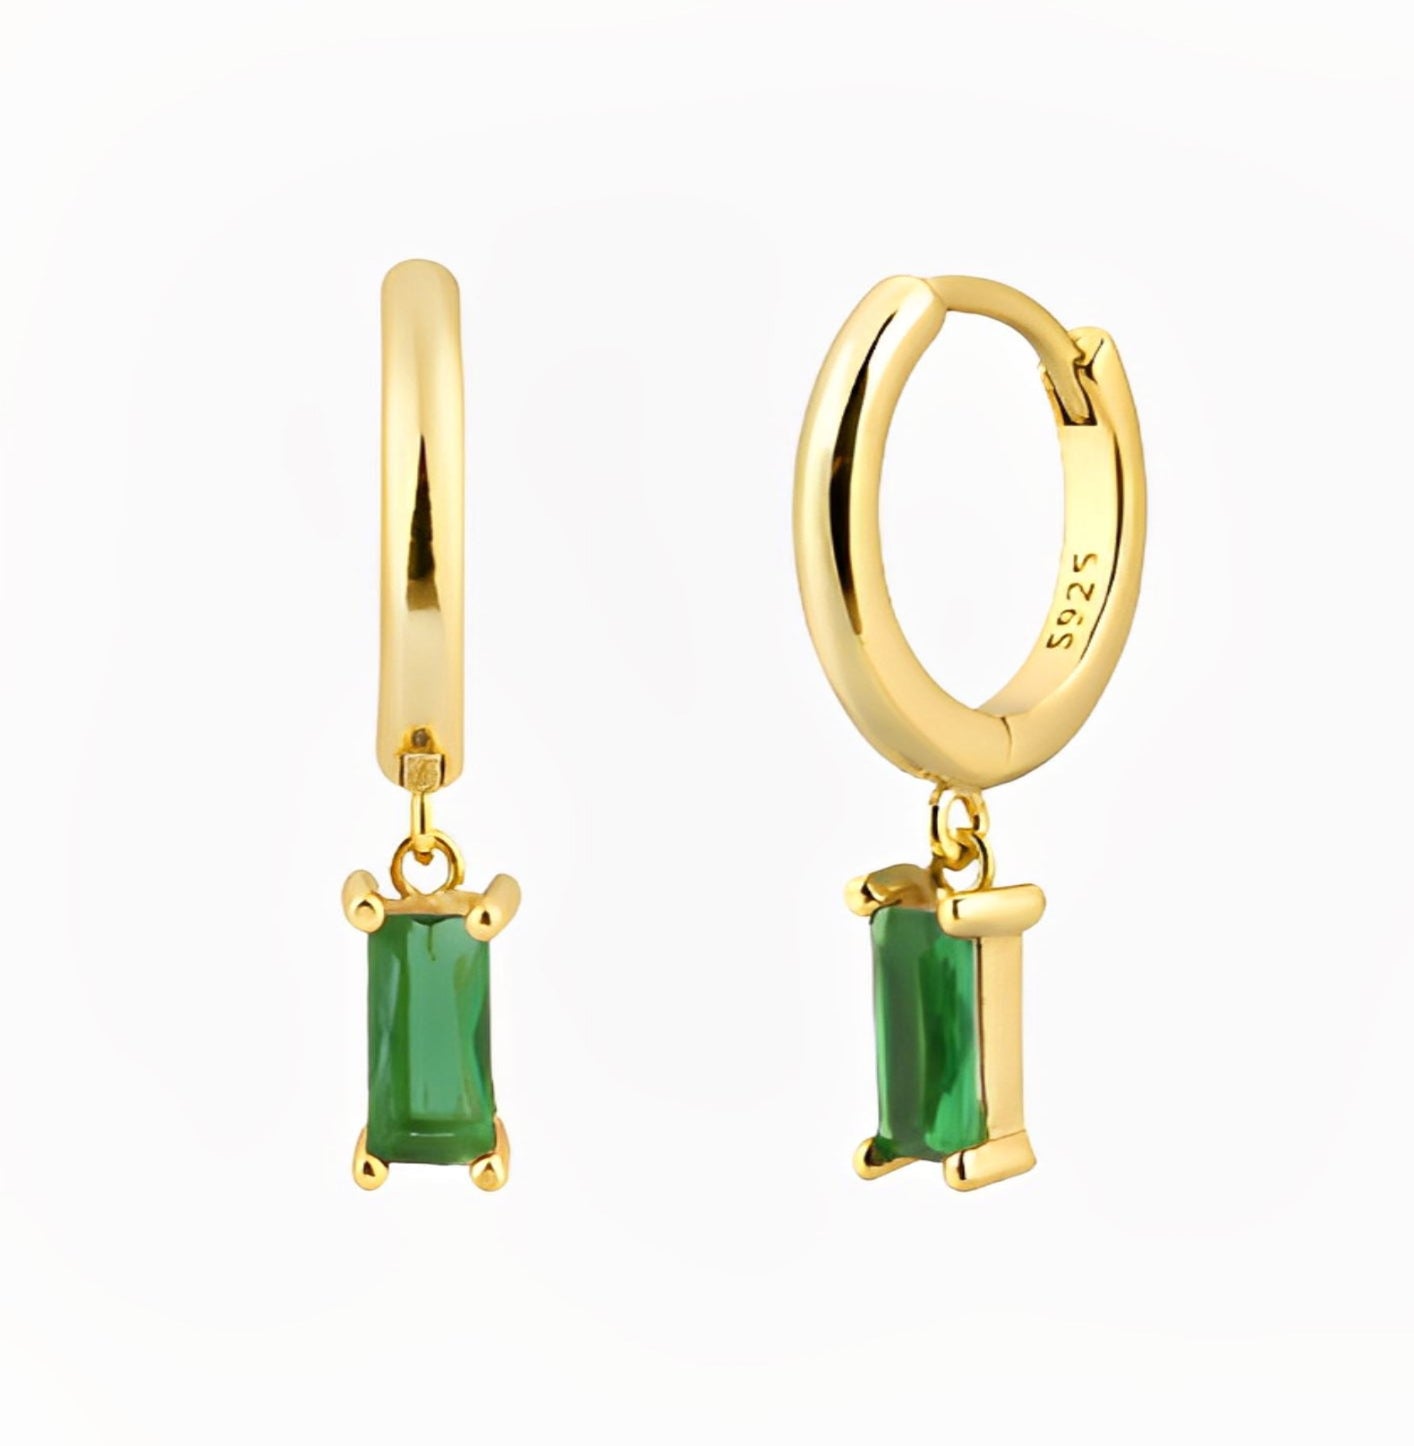 DAINTY EARRINGS earing Yubama Jewelry Online Store - The Elegant Designs of Gold and Silver ! 